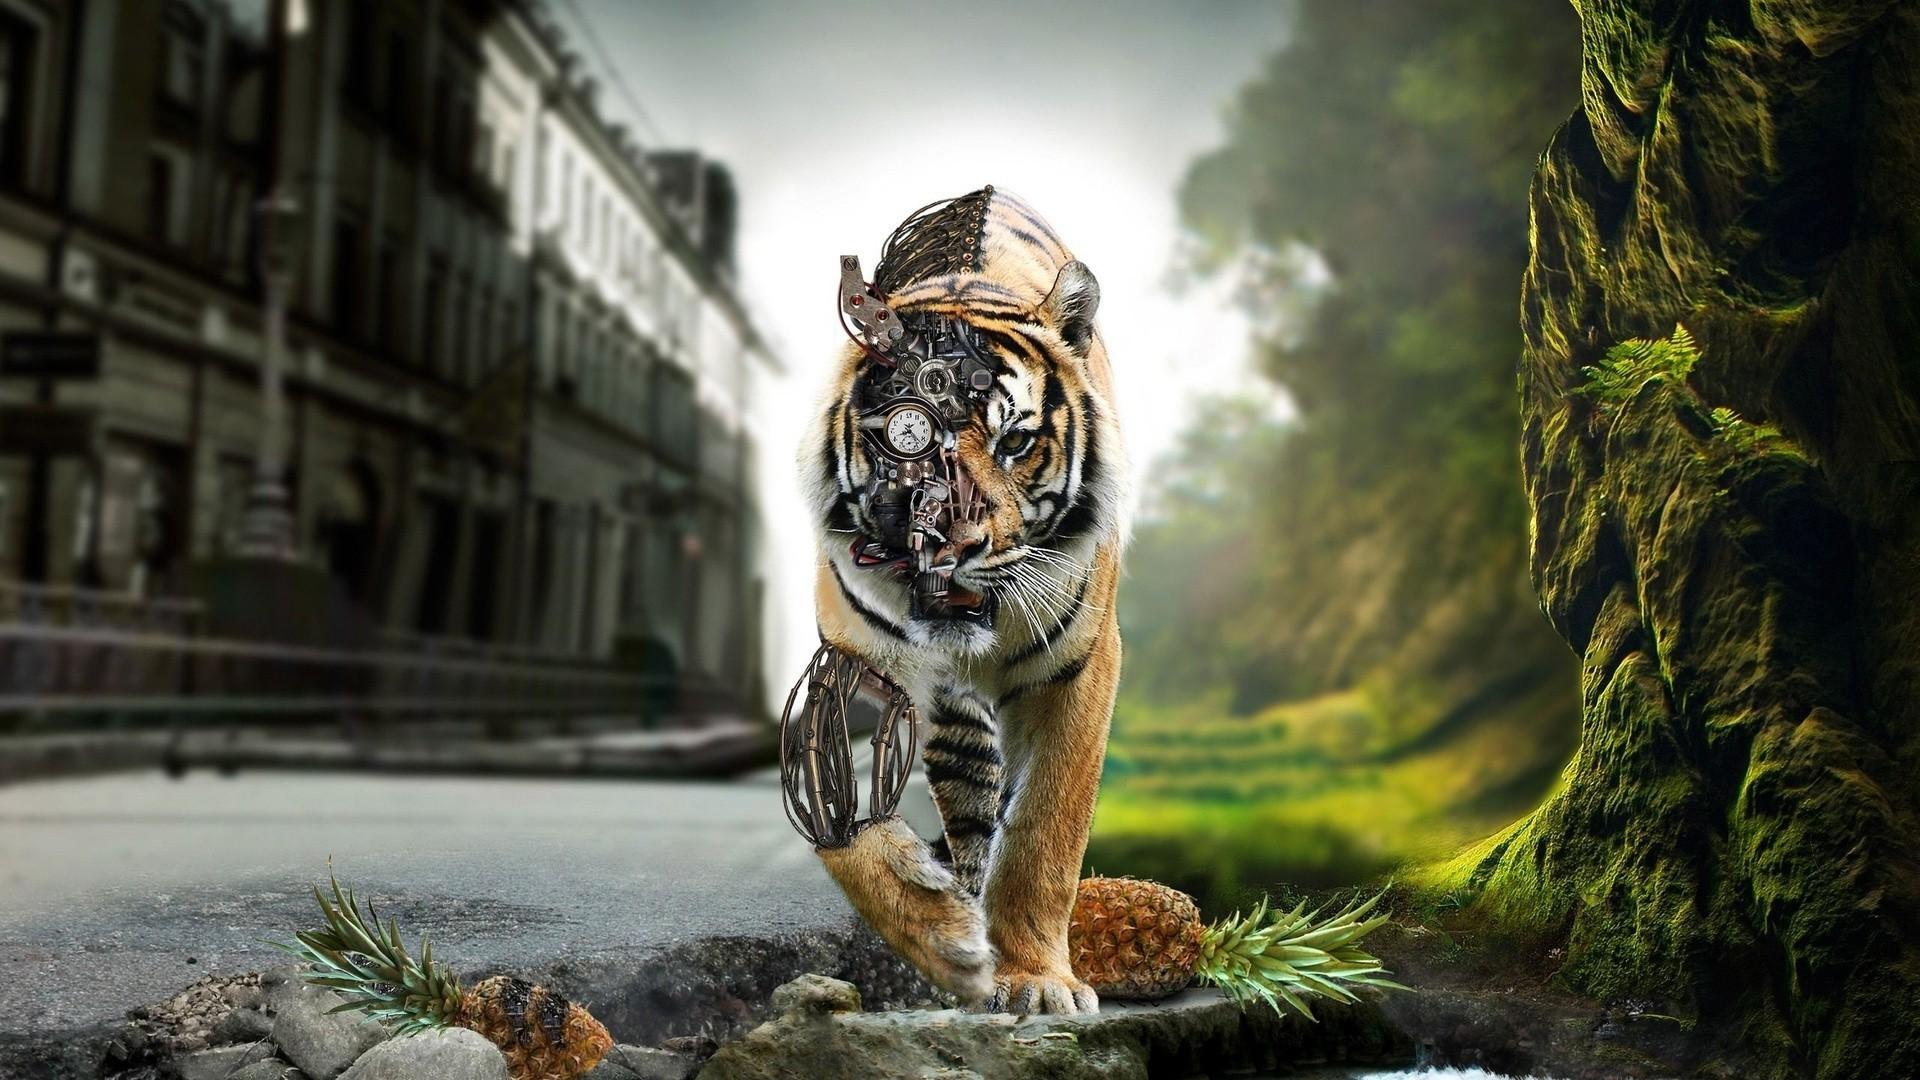 Tiger Wallpaper background picture